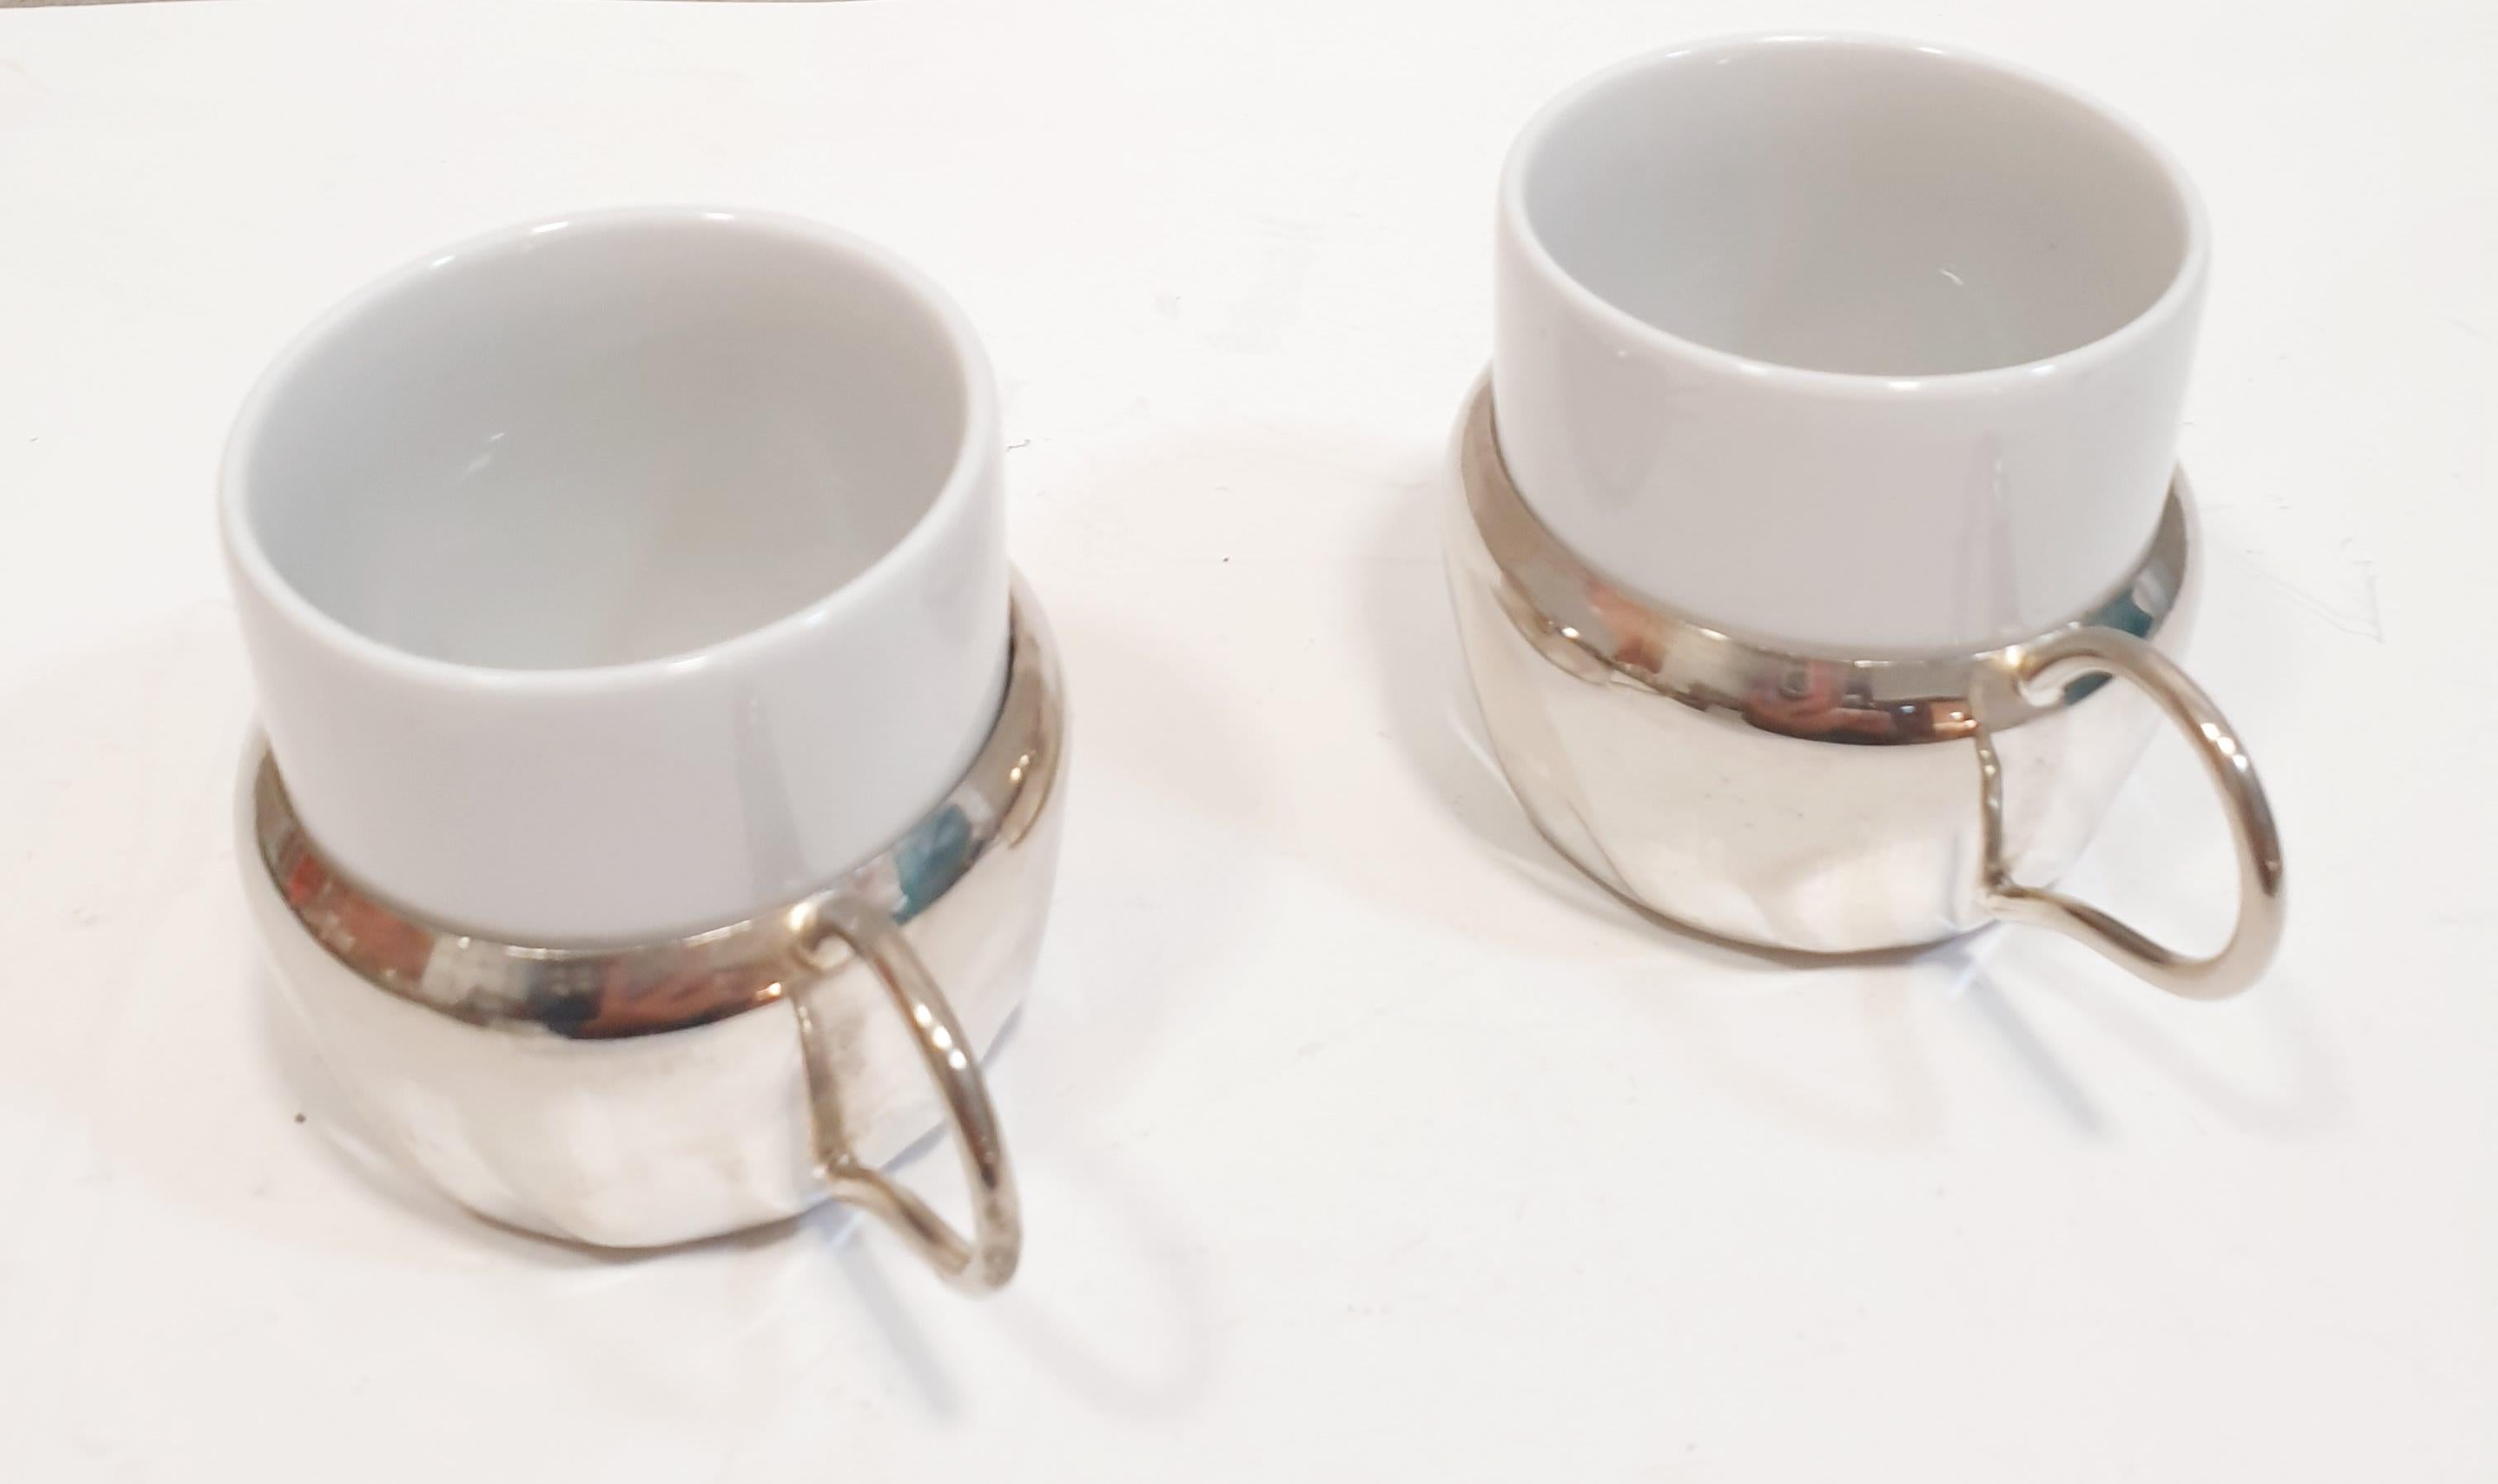 French Antique Silver Holders with Built-in Vessels from the 19th Century For Sale